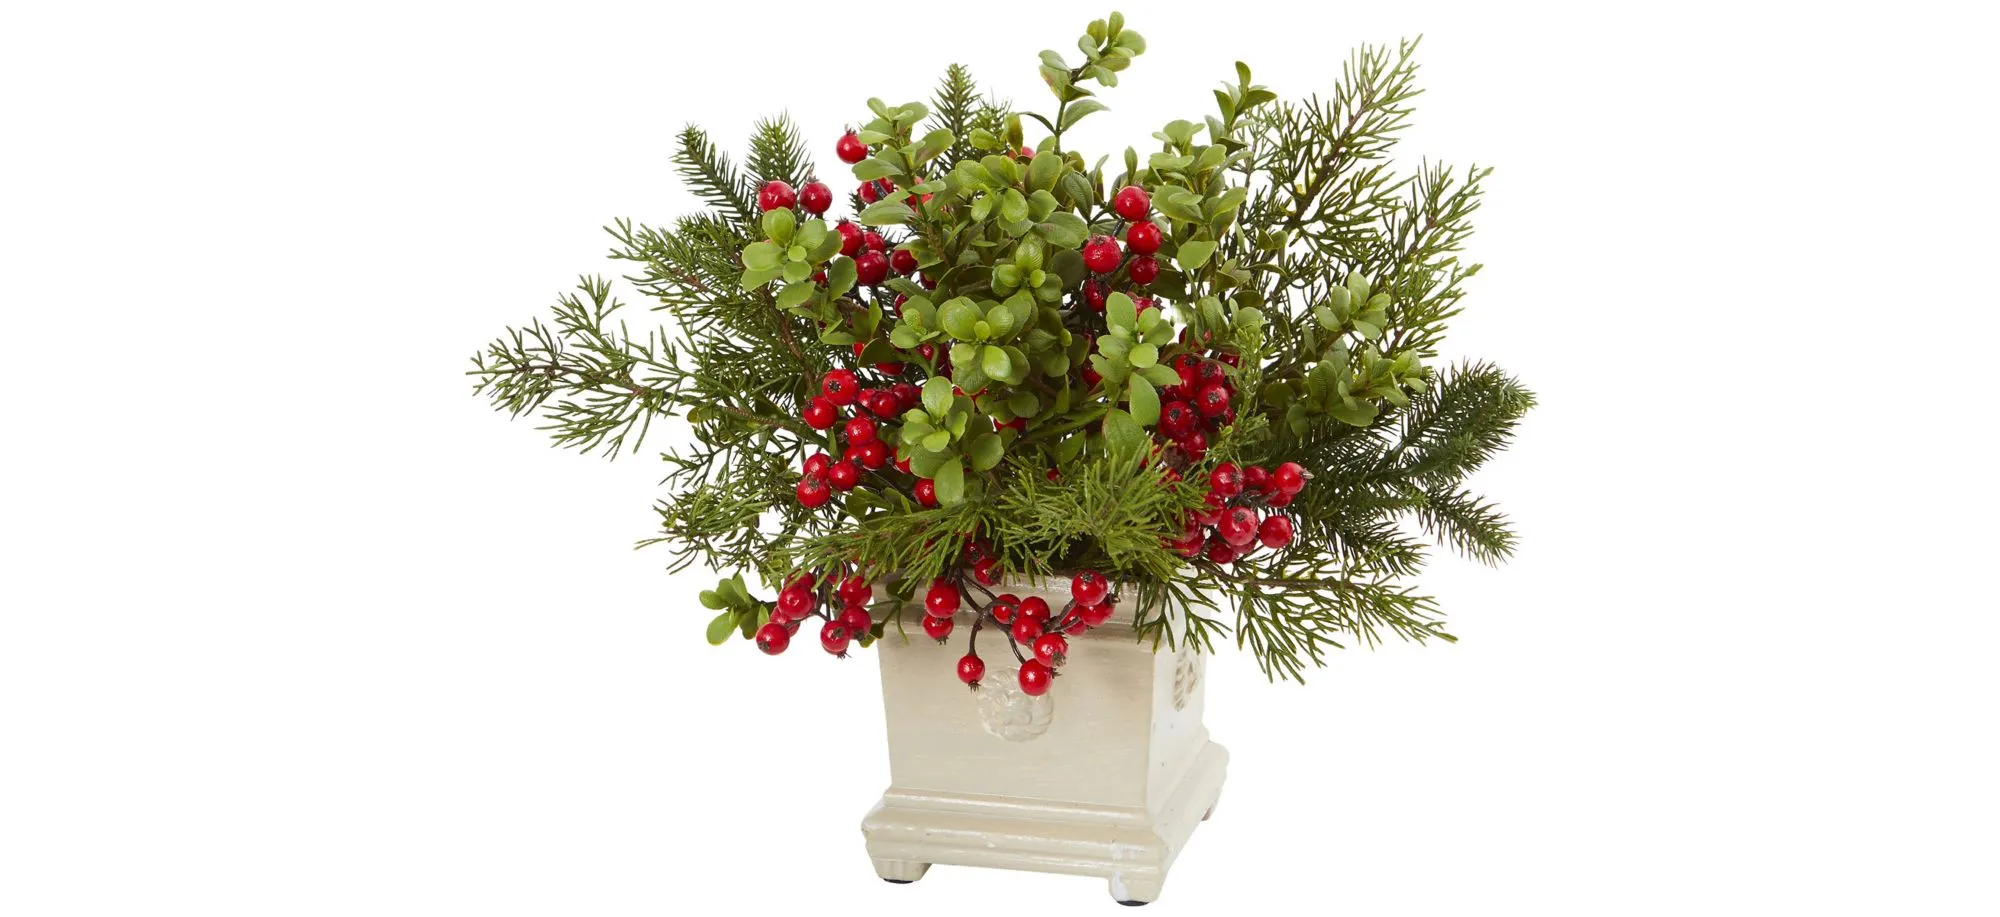 Holiday Berry and Pine Artificial Arrangement in Green by Bellanest